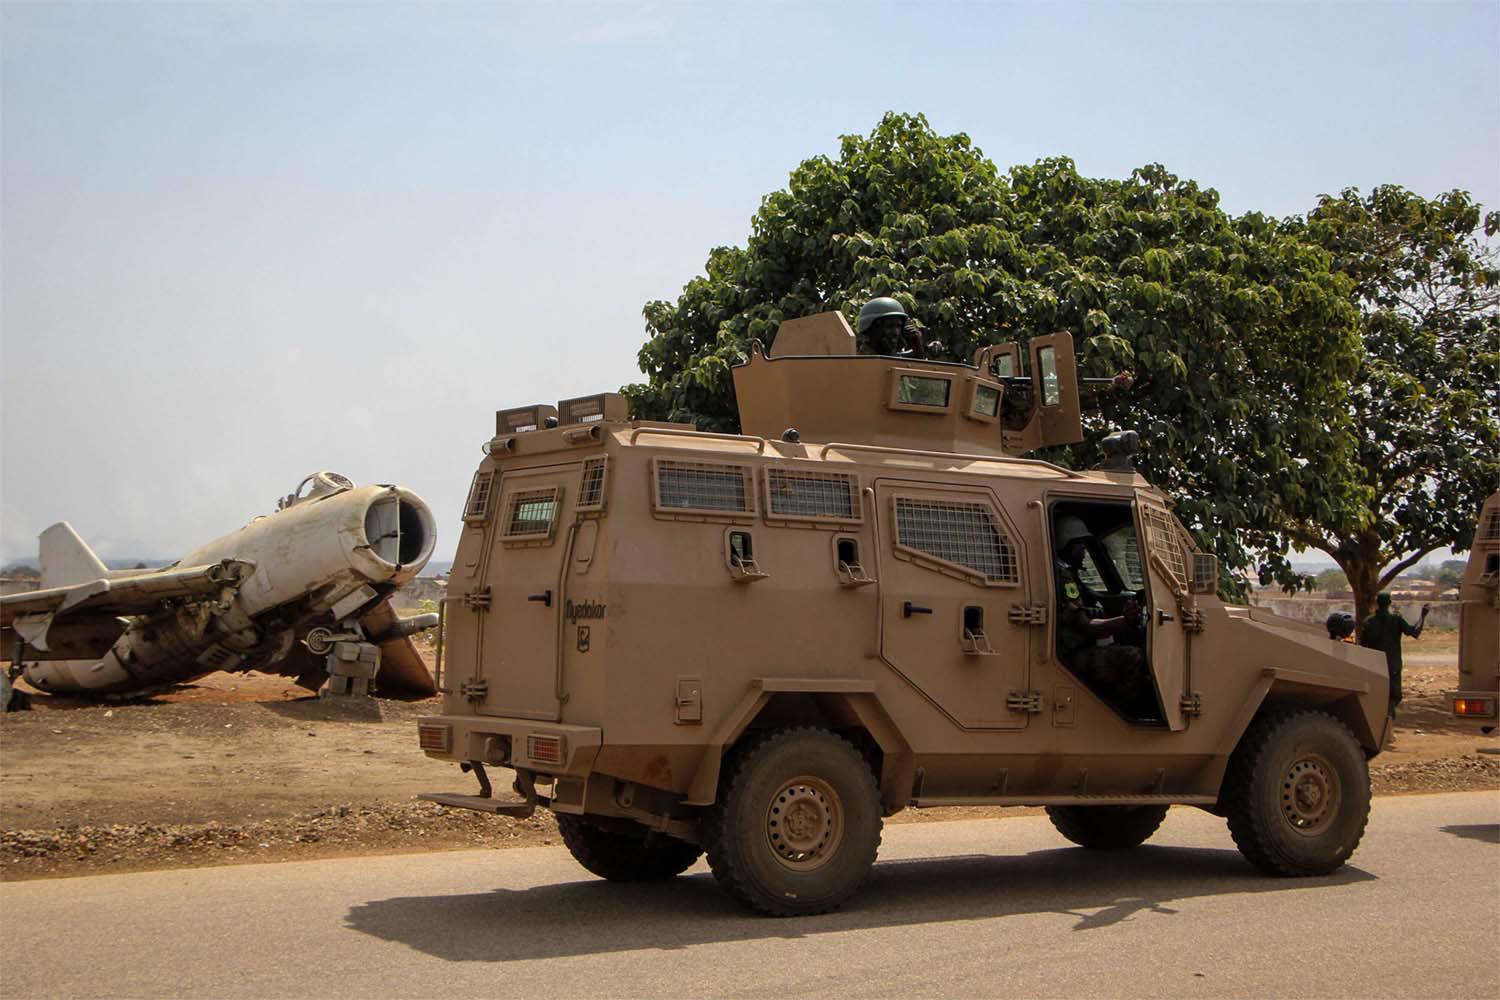 Insecurity remains rife across South Sudan